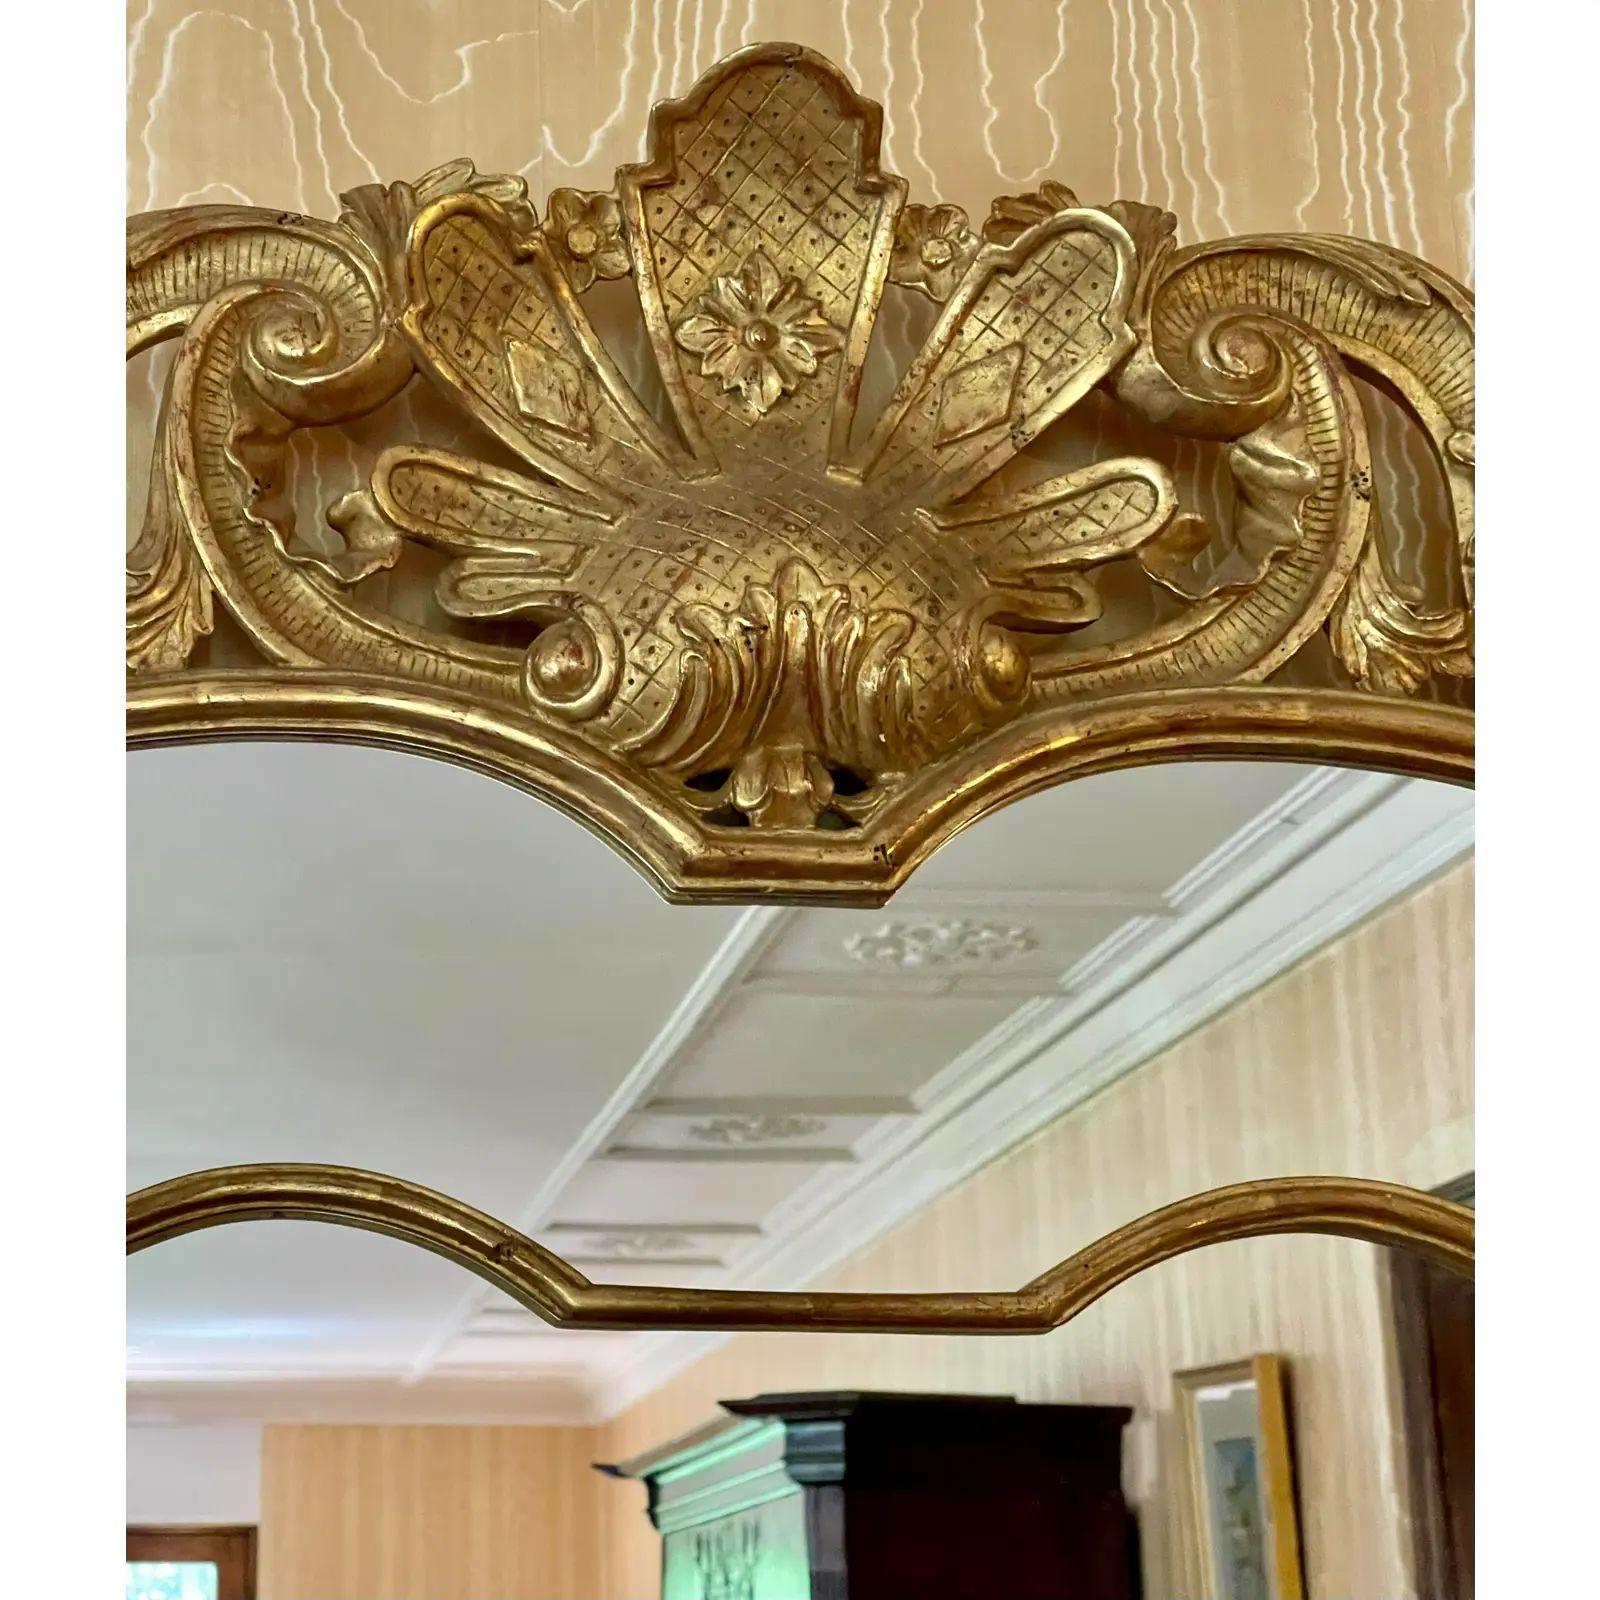 Regency style giltwood Rococo mirror by Villa Melrose. Featuring an exquisite and very expensive gilded finish with an elaborate carved wood decorative form.

Additional information: 
Materials: Giltwood, Mirror
Color: Gold
Period: